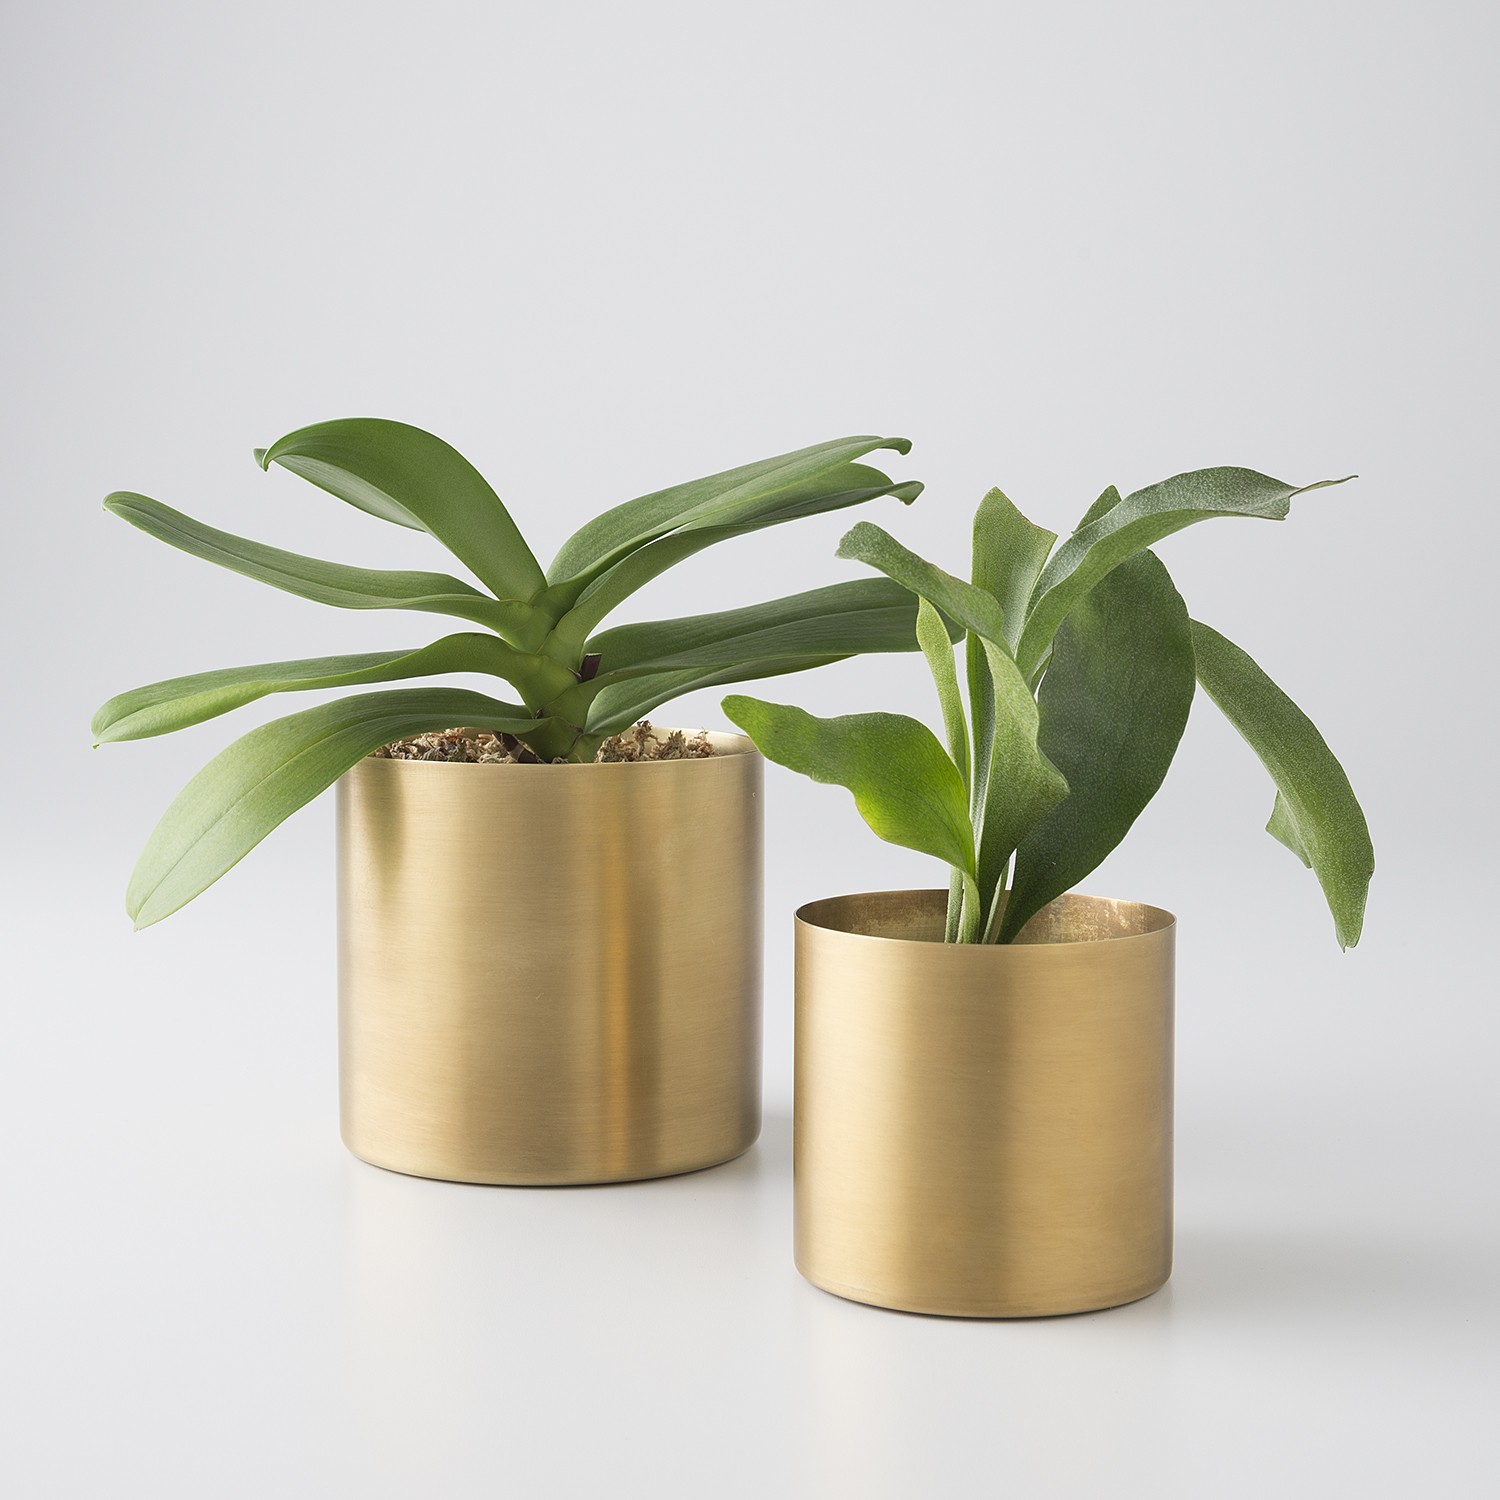 Decorative Brass Planters For Home